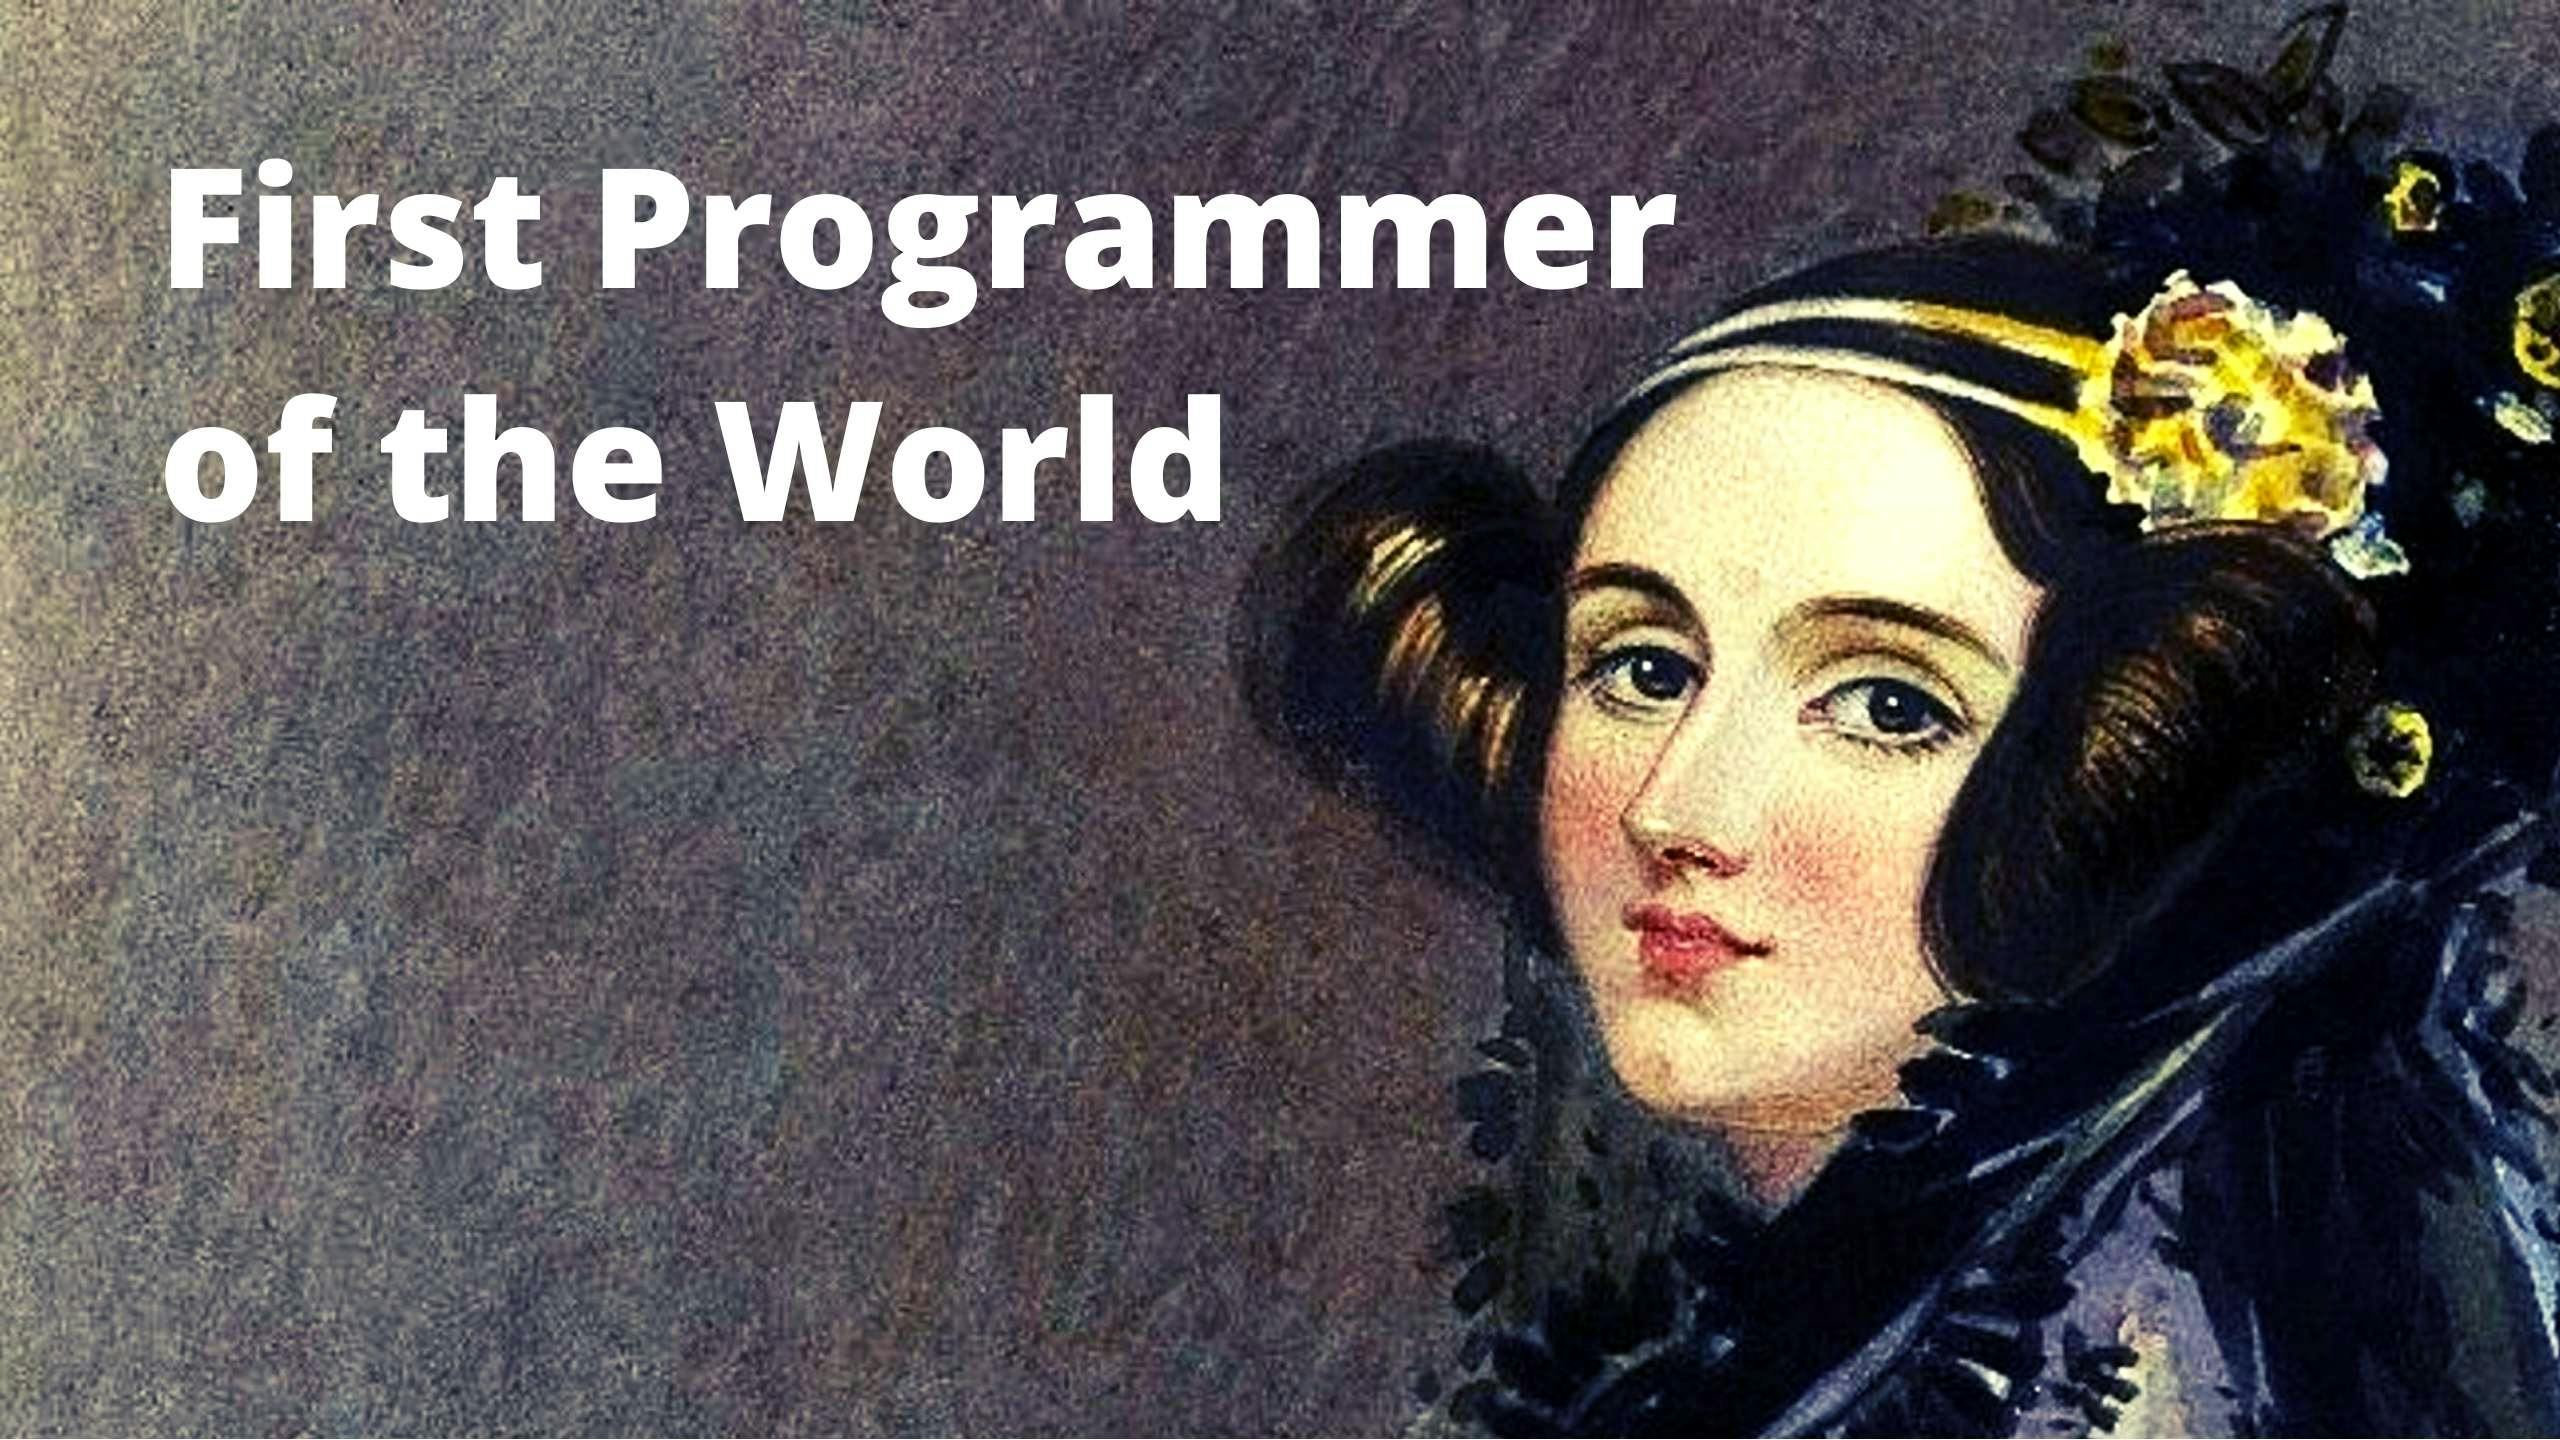 The First Programmer of the World - Ada Lovelace